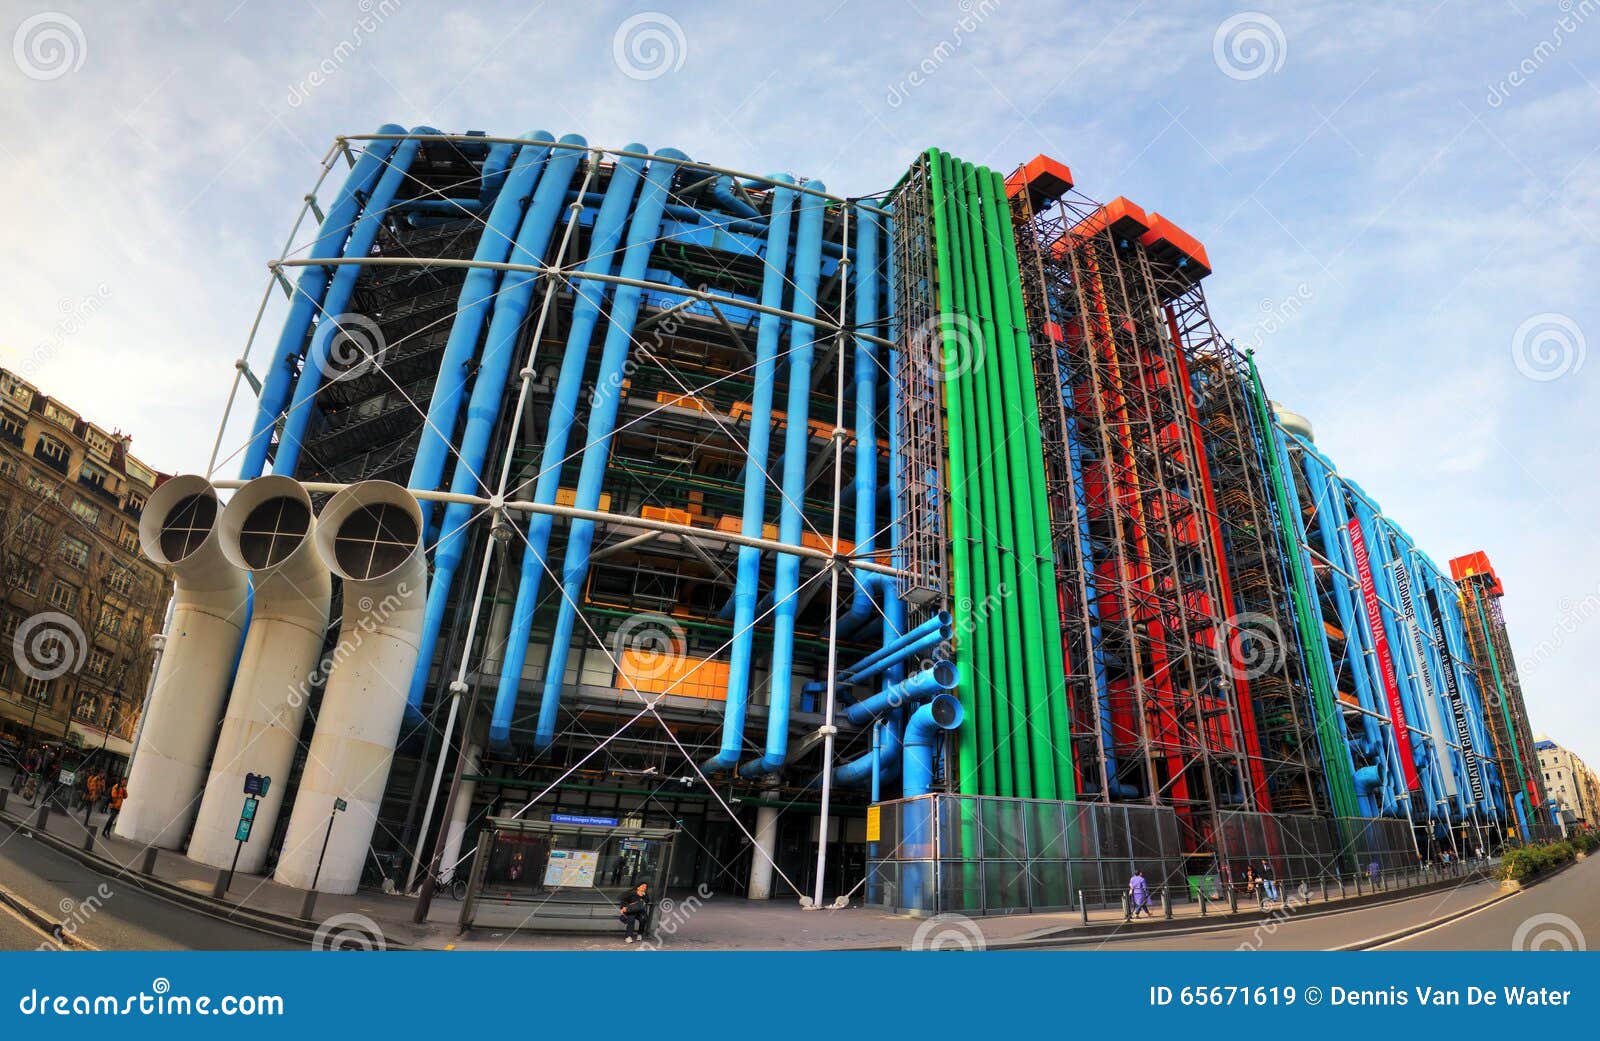 centre-pompidou-wide-angle-view-georges-visited-many-tourists-every-day-paris-france-february-65671619.jpg